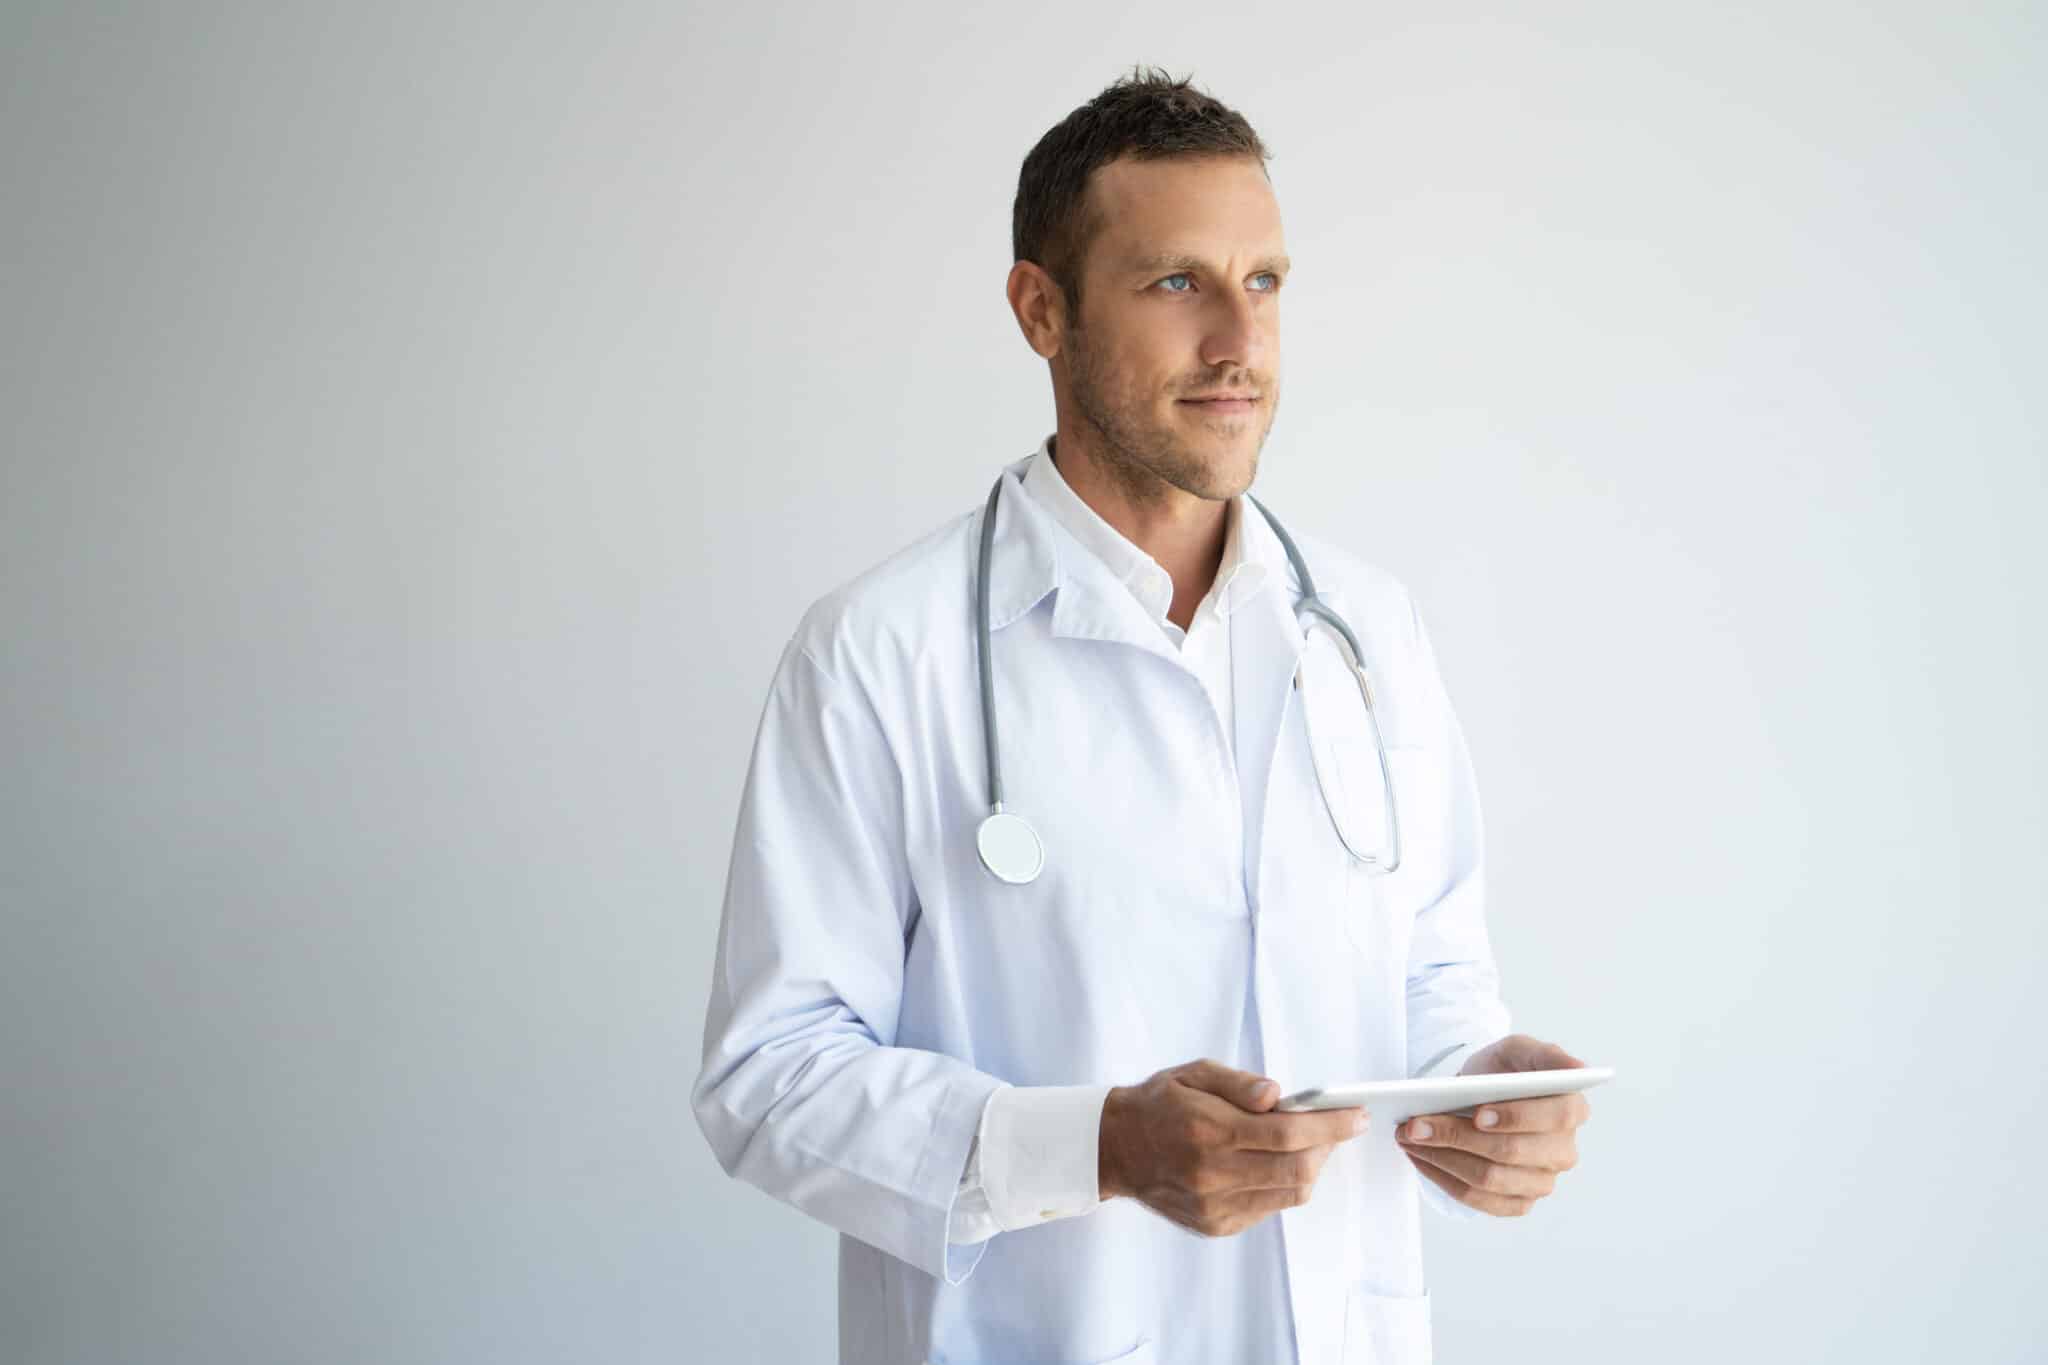 Choosing between in-office and remote medical scribes can be difficult. Learn about the benefits and drawbacks of each option. Contact Athreon to learn more!